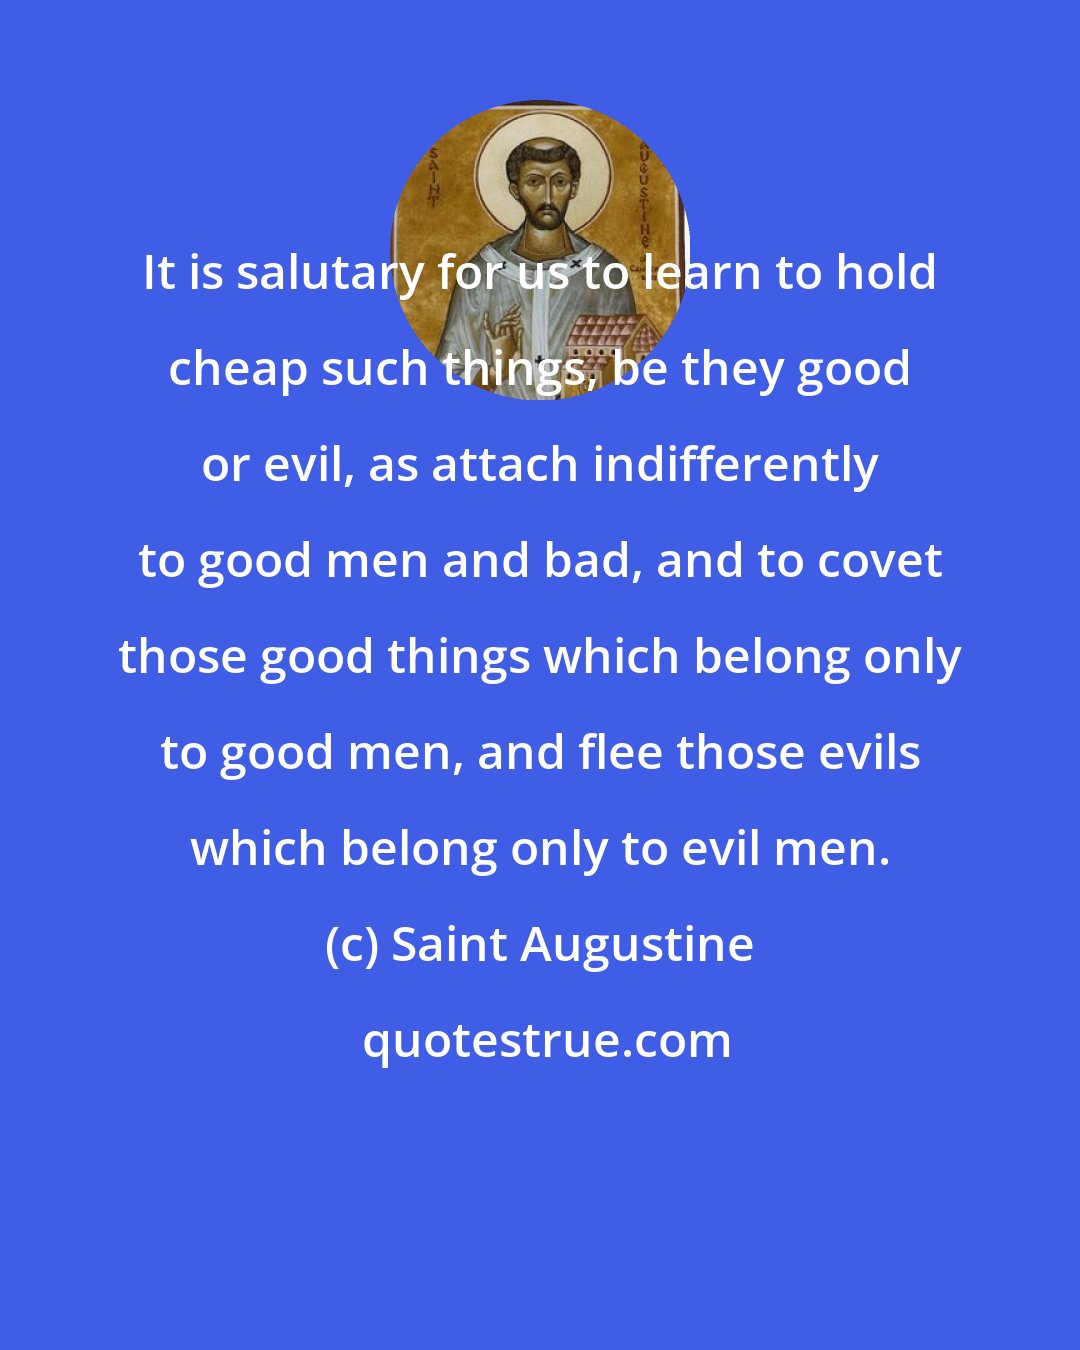 Saint Augustine: It is salutary for us to learn to hold cheap such things, be they good or evil, as attach indifferently to good men and bad, and to covet those good things which belong only to good men, and flee those evils which belong only to evil men.